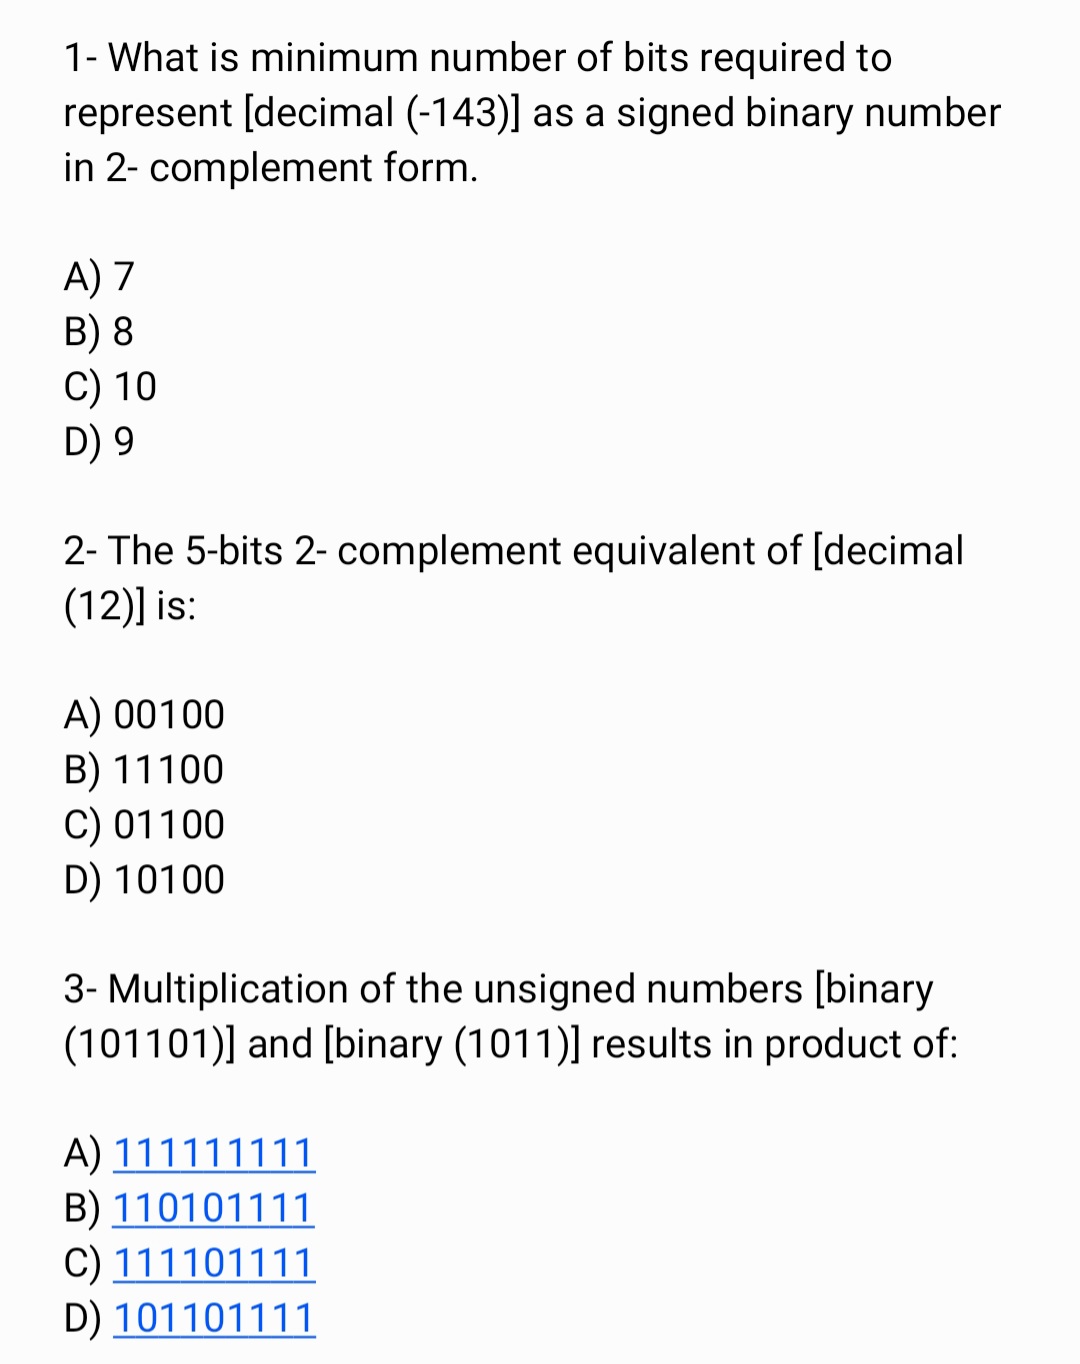 1- What is minimum number of bits required to
represent [decimal (-143)] as a signed binary number
in 2- complement form.
A) 7
B) 8
C) 10
D) 9
2- The 5-bits 2- complement equivalent of [decimal
(12)] is:
A) 00100
B) 11100
C) 01100
D) 10100
3- Multiplication of the unsigned numbers [binary
(101101)] and [binary (1011)] results in product of:
A) 111111111
B) 110101111
C) 111101111
D) 101101111
